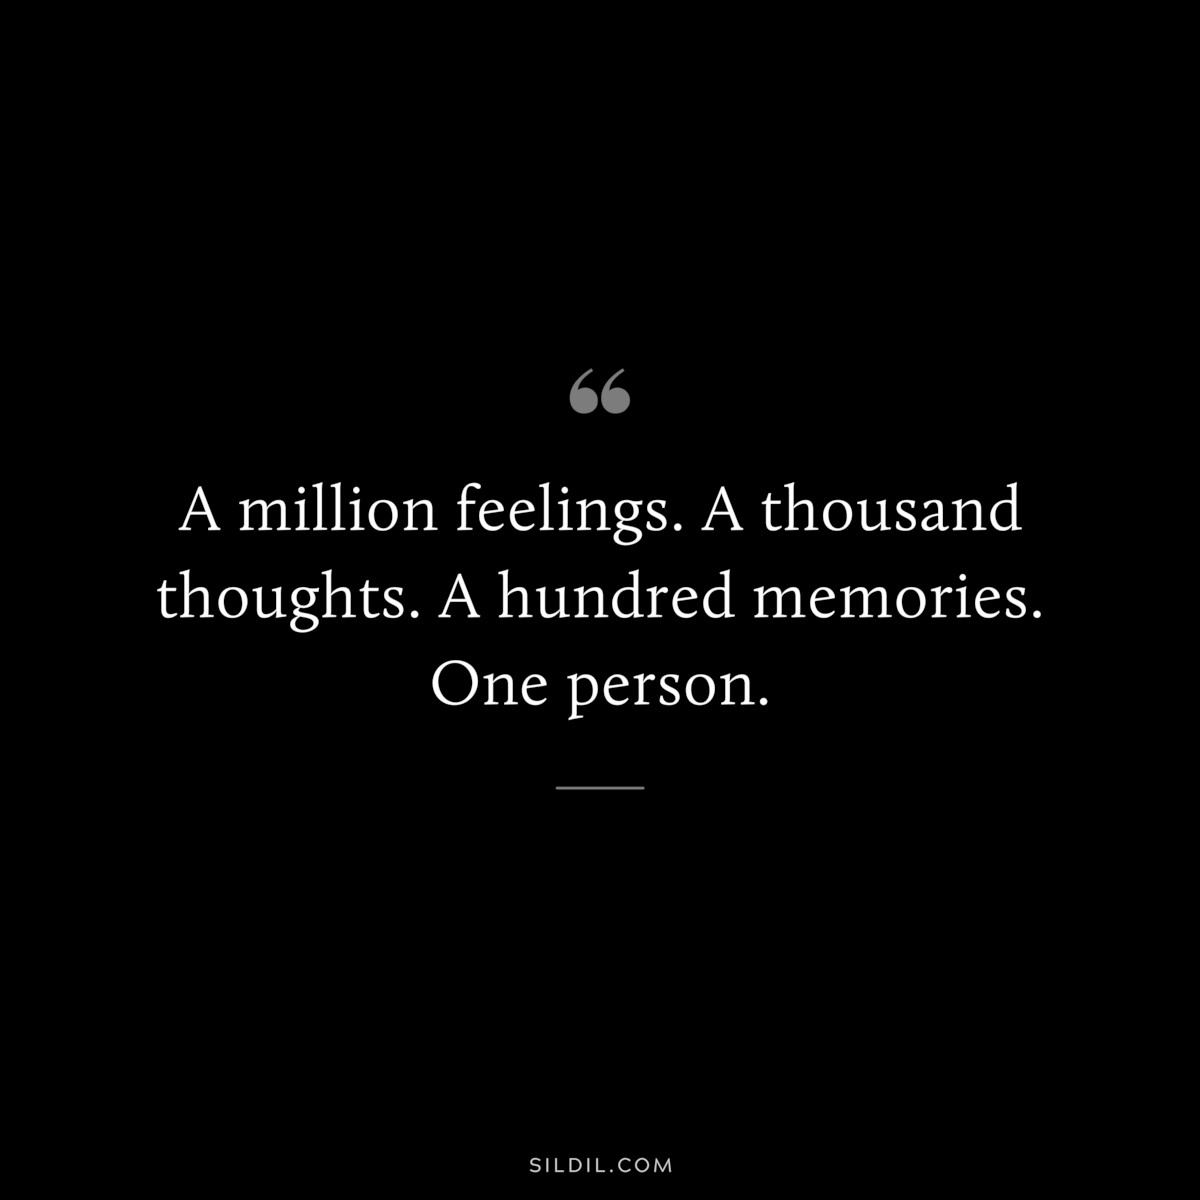 A million feelings. A thousand thoughts. A hundred memories. One person.